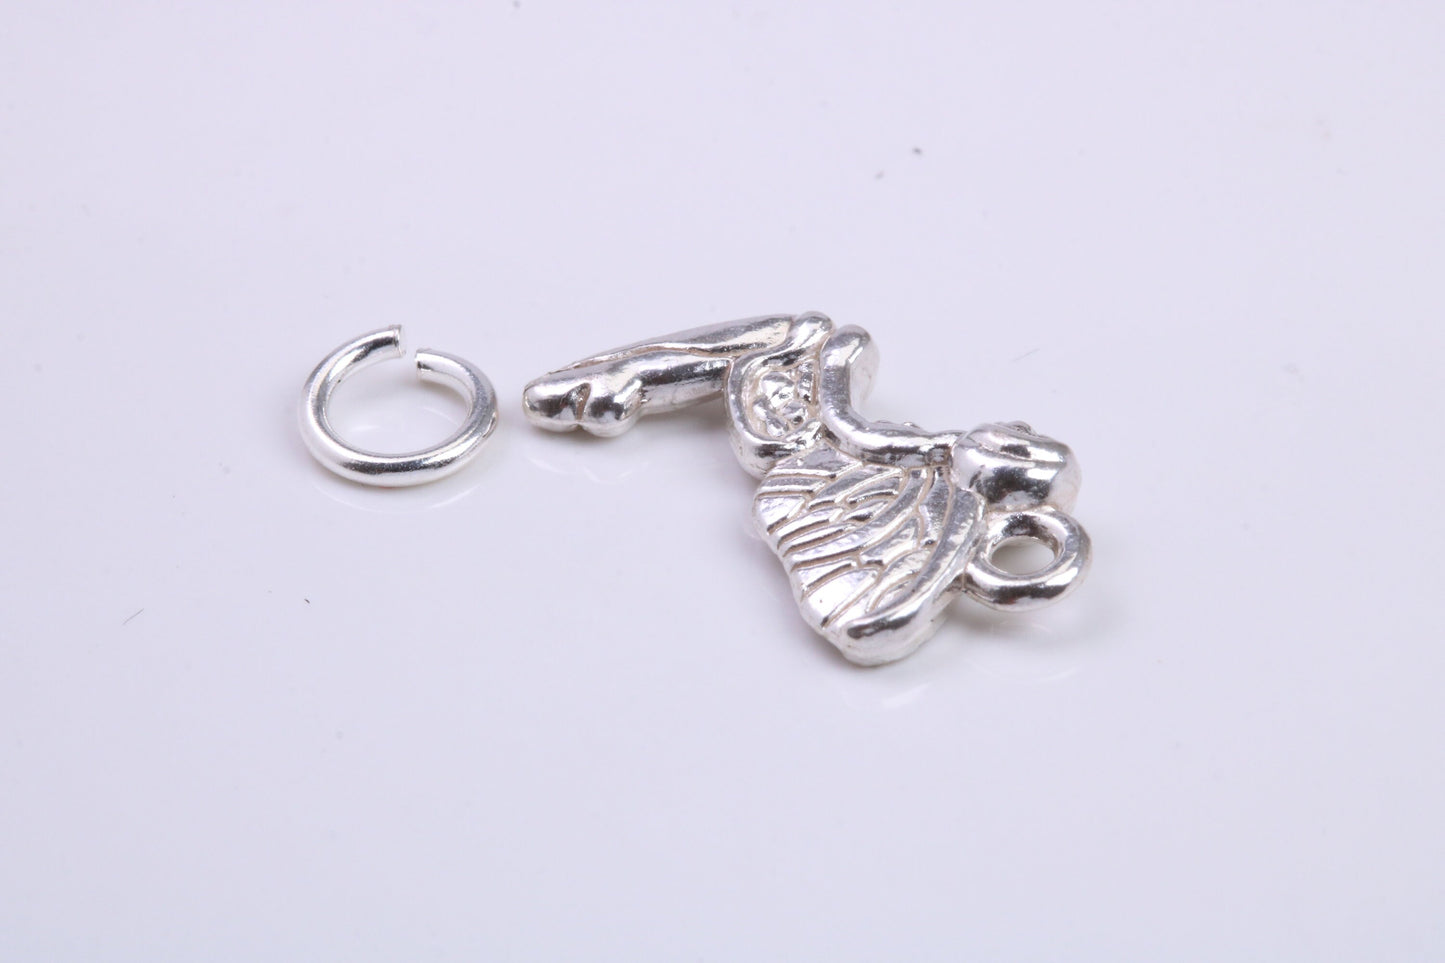 Fairy Charm, Traditional Charm, Made from Solid 925 Grade Sterling Silver, Complete with Attachment Link